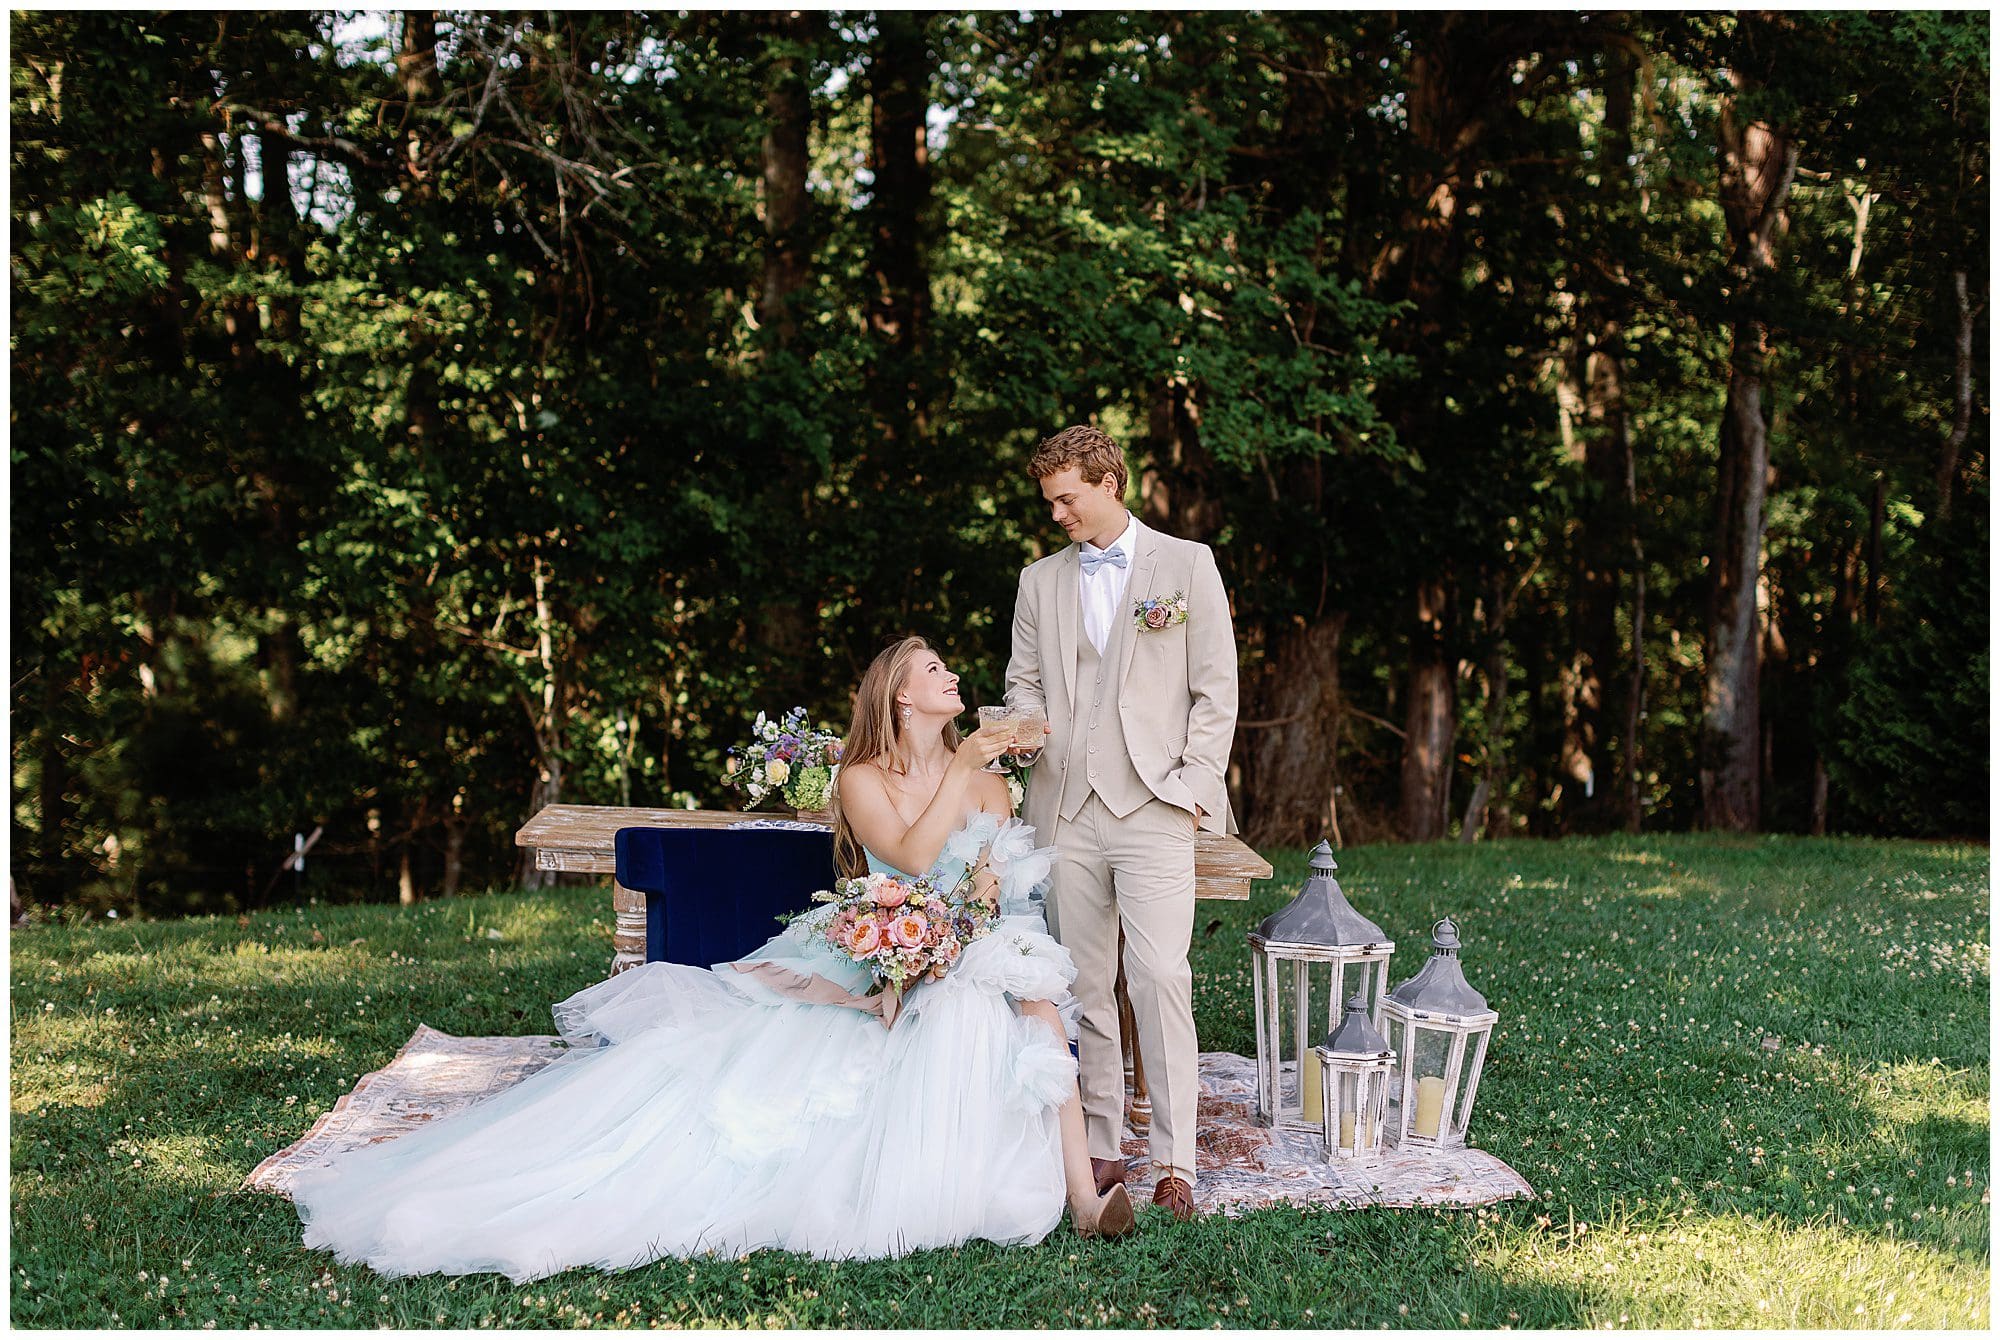 A Parisian-inspired summer wedding with the bride and groom sitting on a blanket in the grass at The Ridge.